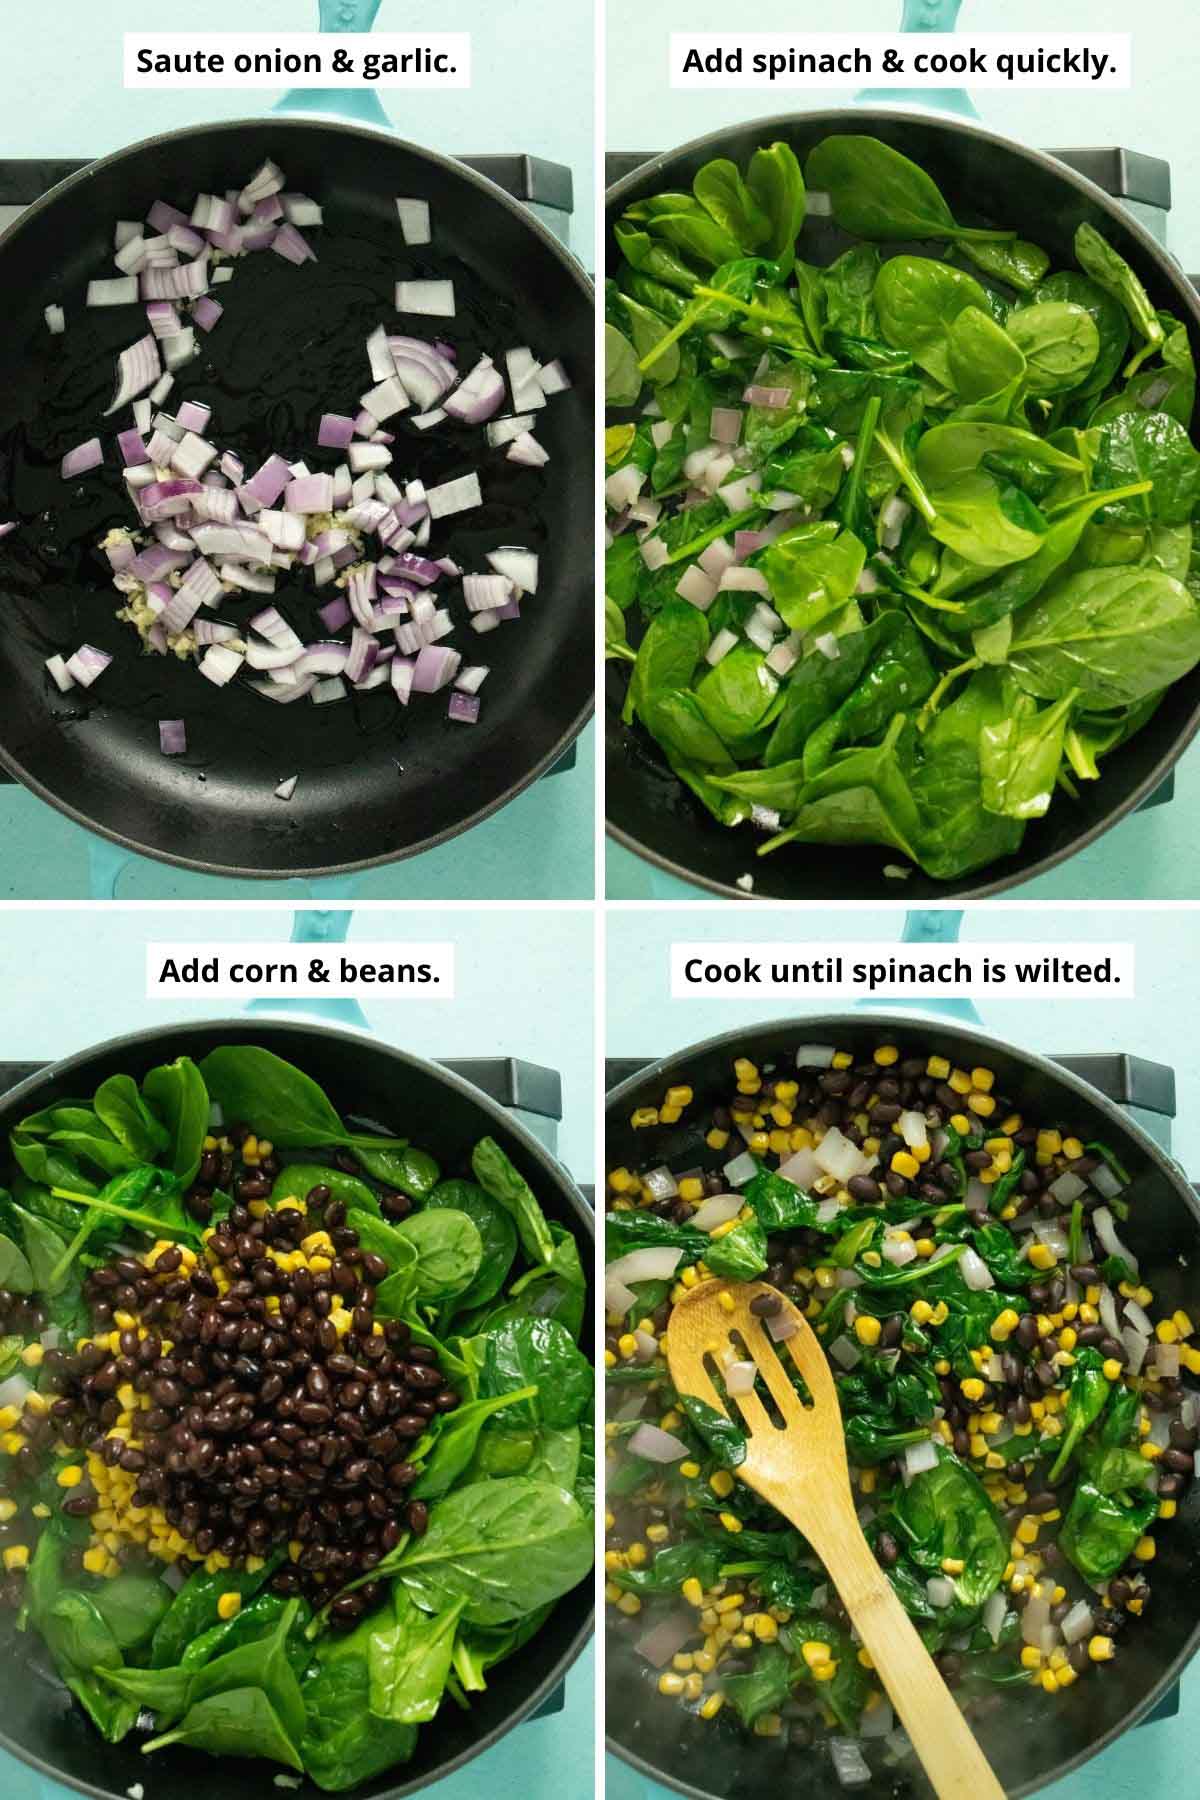 image collage showing onion saute, adding spinach to the pan, adding the beans and corn, and the sautéed veggies in the pan